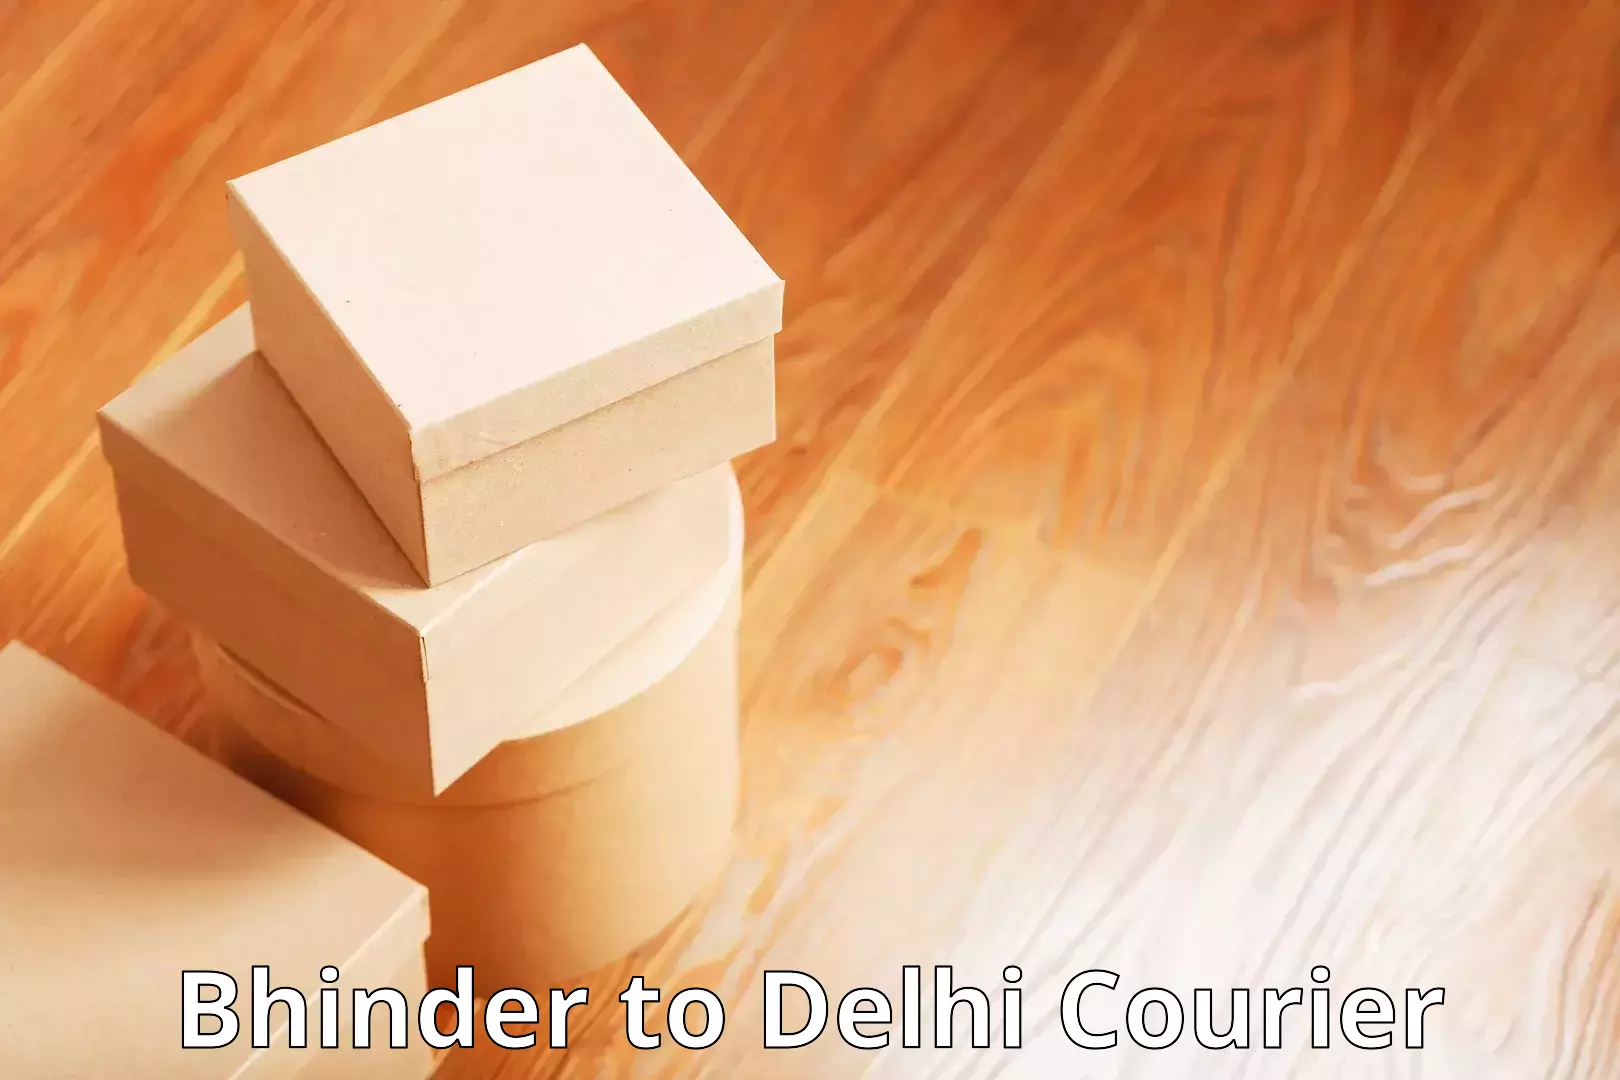 Automated parcel services Bhinder to Delhi